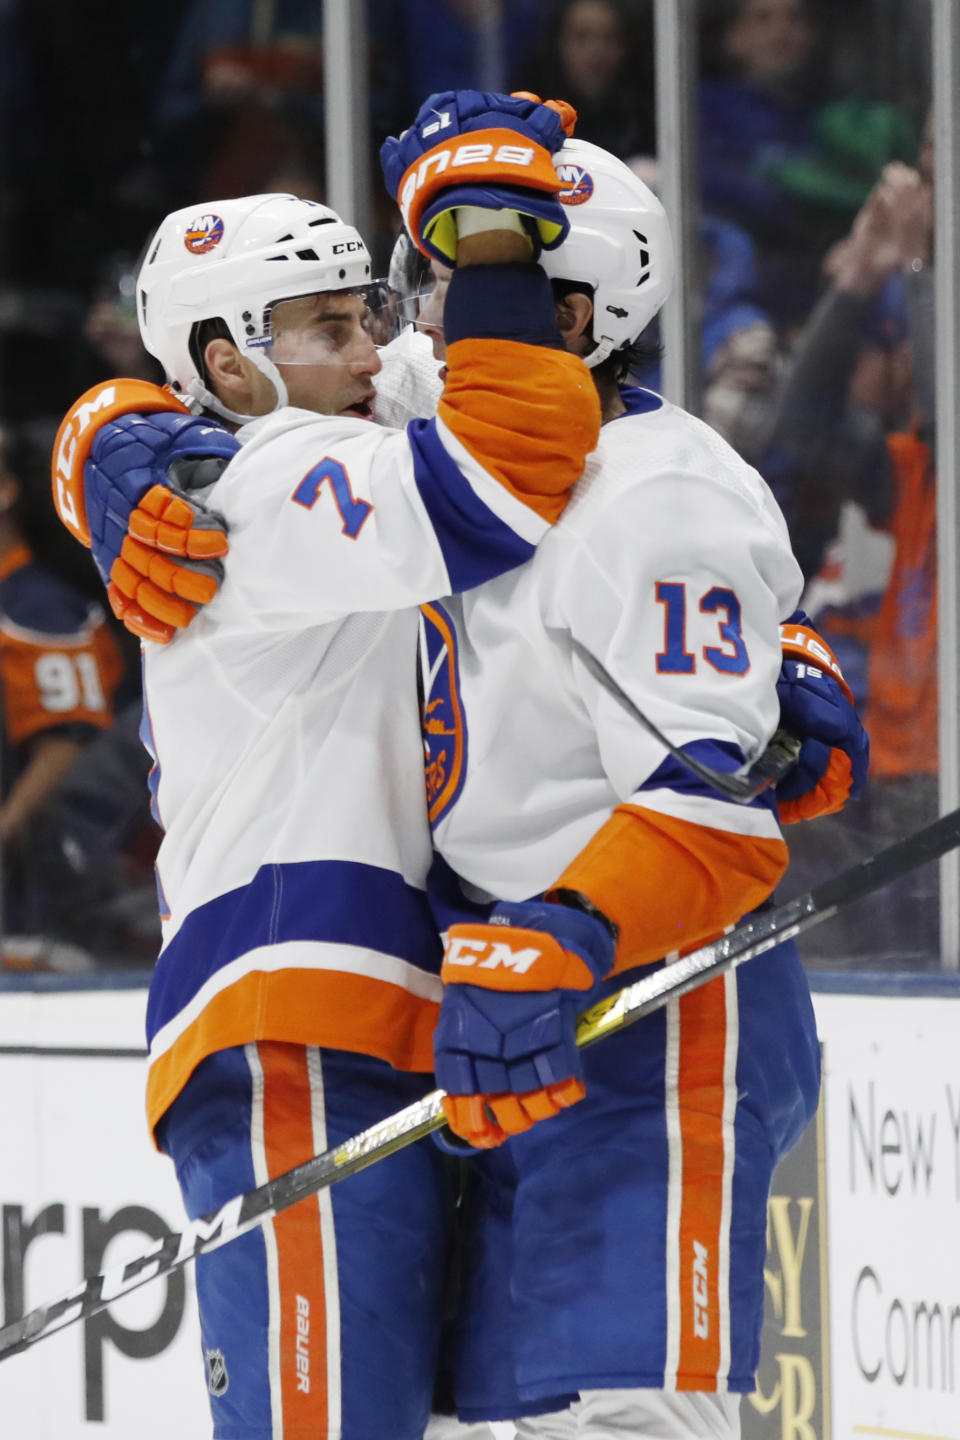 New York Islanders right wing Jordan Eberle (7) celebrates with center Mathew Barzal (13) after Eberle scored his second goal of the night against the Detroit Red Wings, during the second period of an NHL hockey game Friday, Feb. 21, 2020, in Uniondale, N.Y. (AP Photo/Kathy Willens)